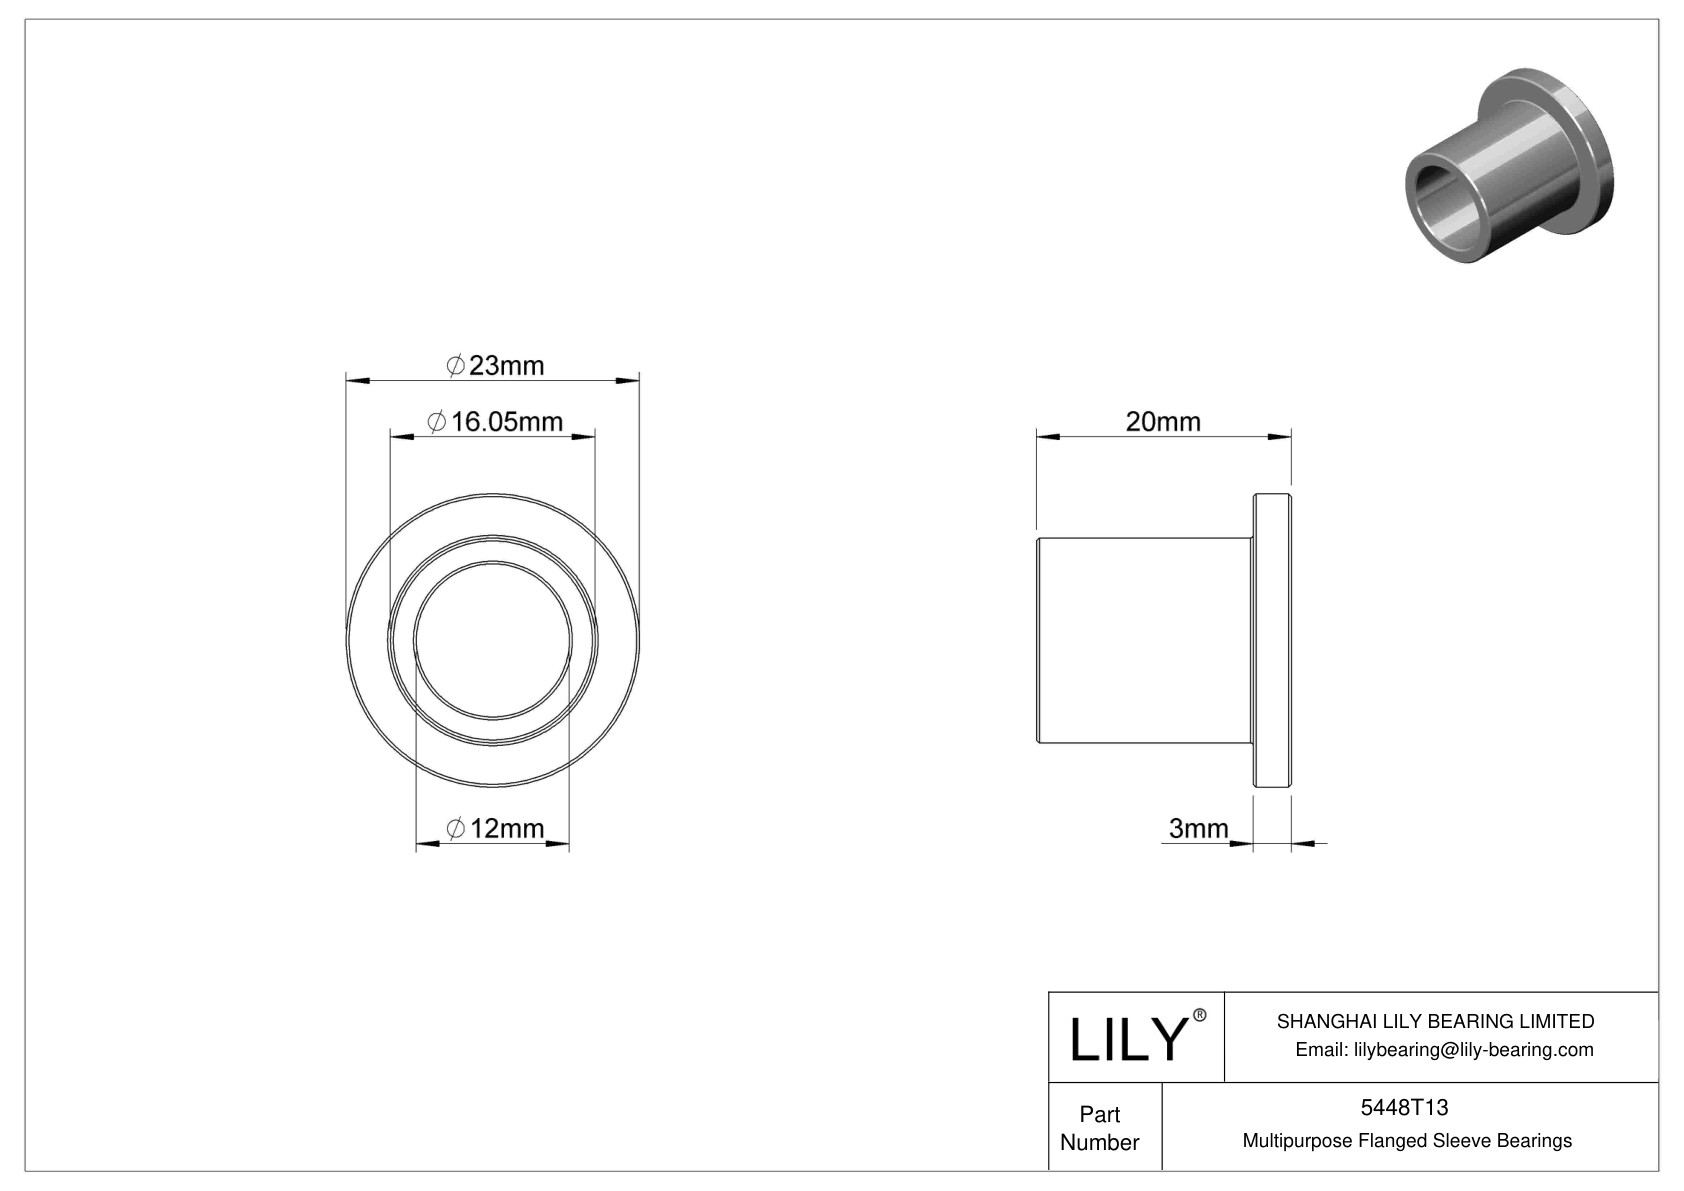 FEEITBD Multipurpose Flanged Sleeve Bearings cad drawing